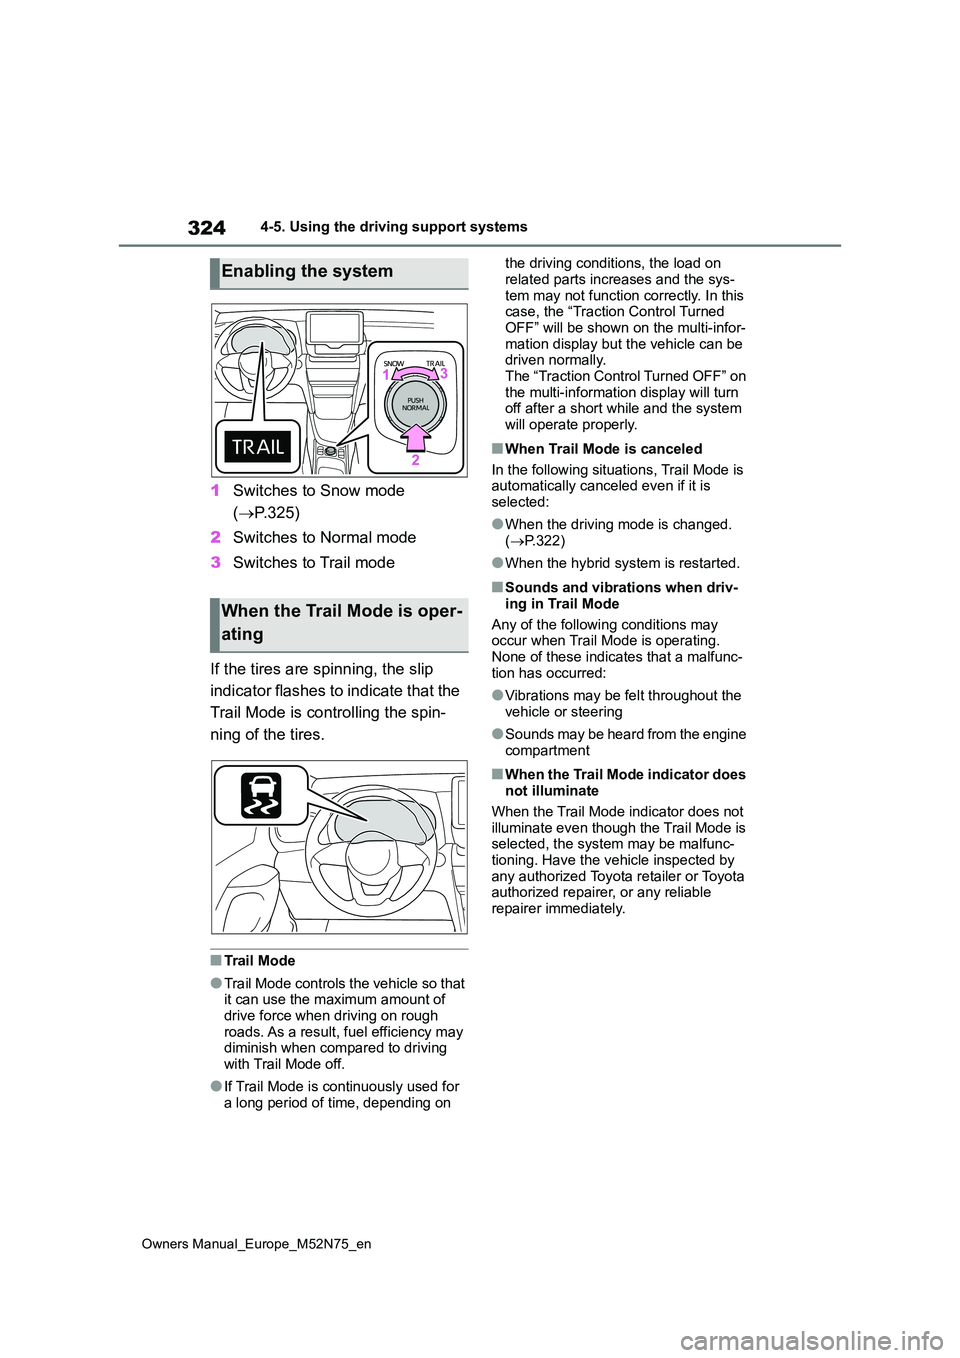 TOYOTA YARIS CROSS 2023  Owners Manual 324
Owners Manual_Europe_M52N75_en
4-5. Using the driving support systems
1Switches to Snow mode  
( P.325) 
2 Switches to Normal mode 
3 Switches to Trail mode 
If the tires are spinning, the slip